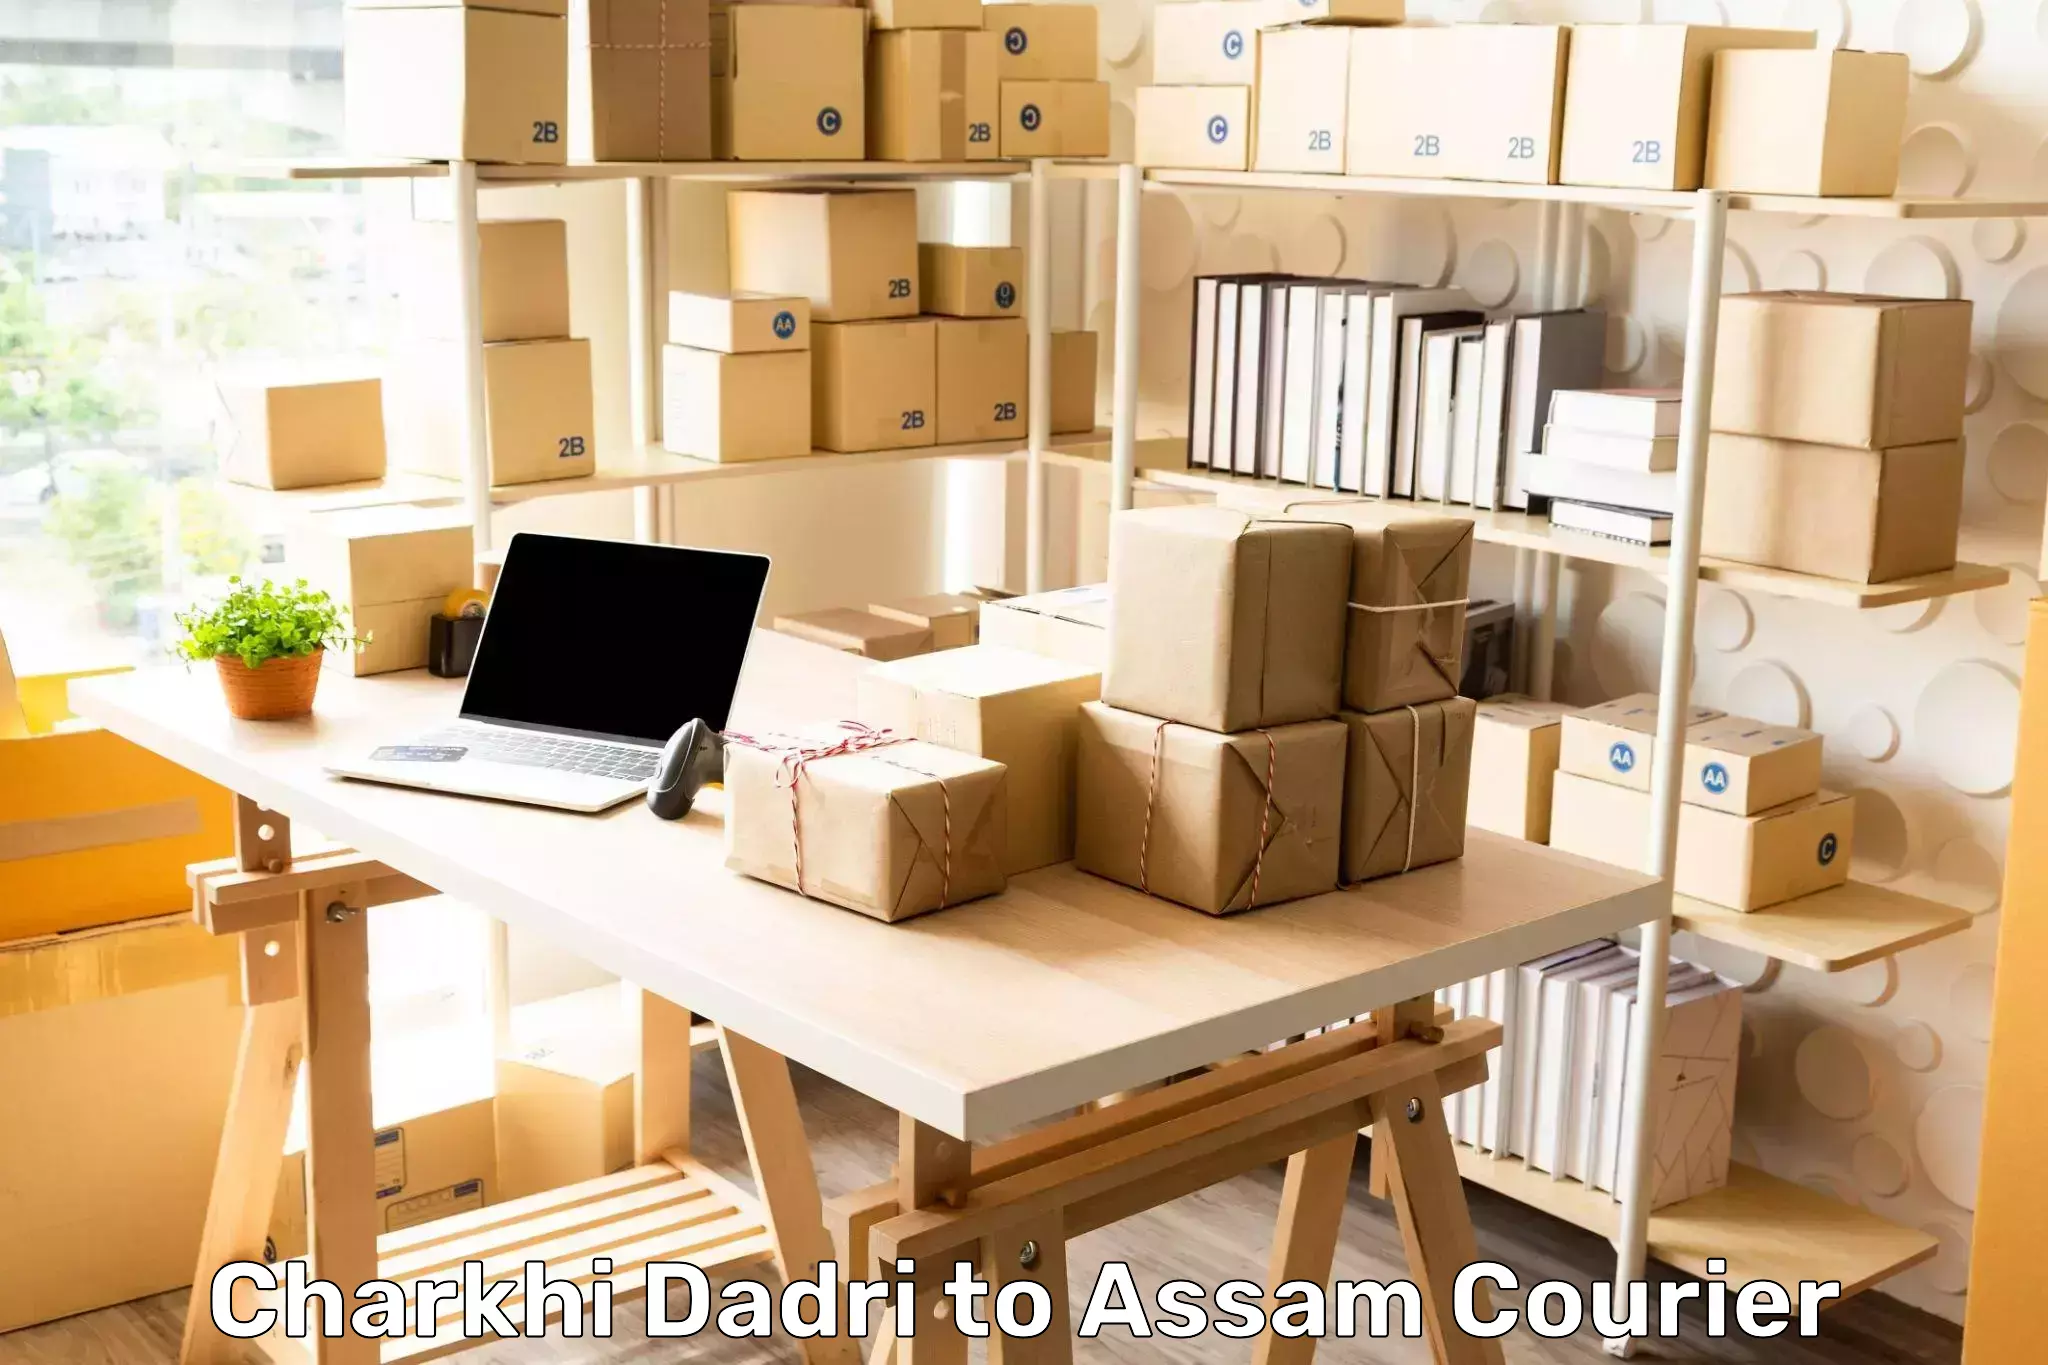 Reliable courier services Charkhi Dadri to Assam